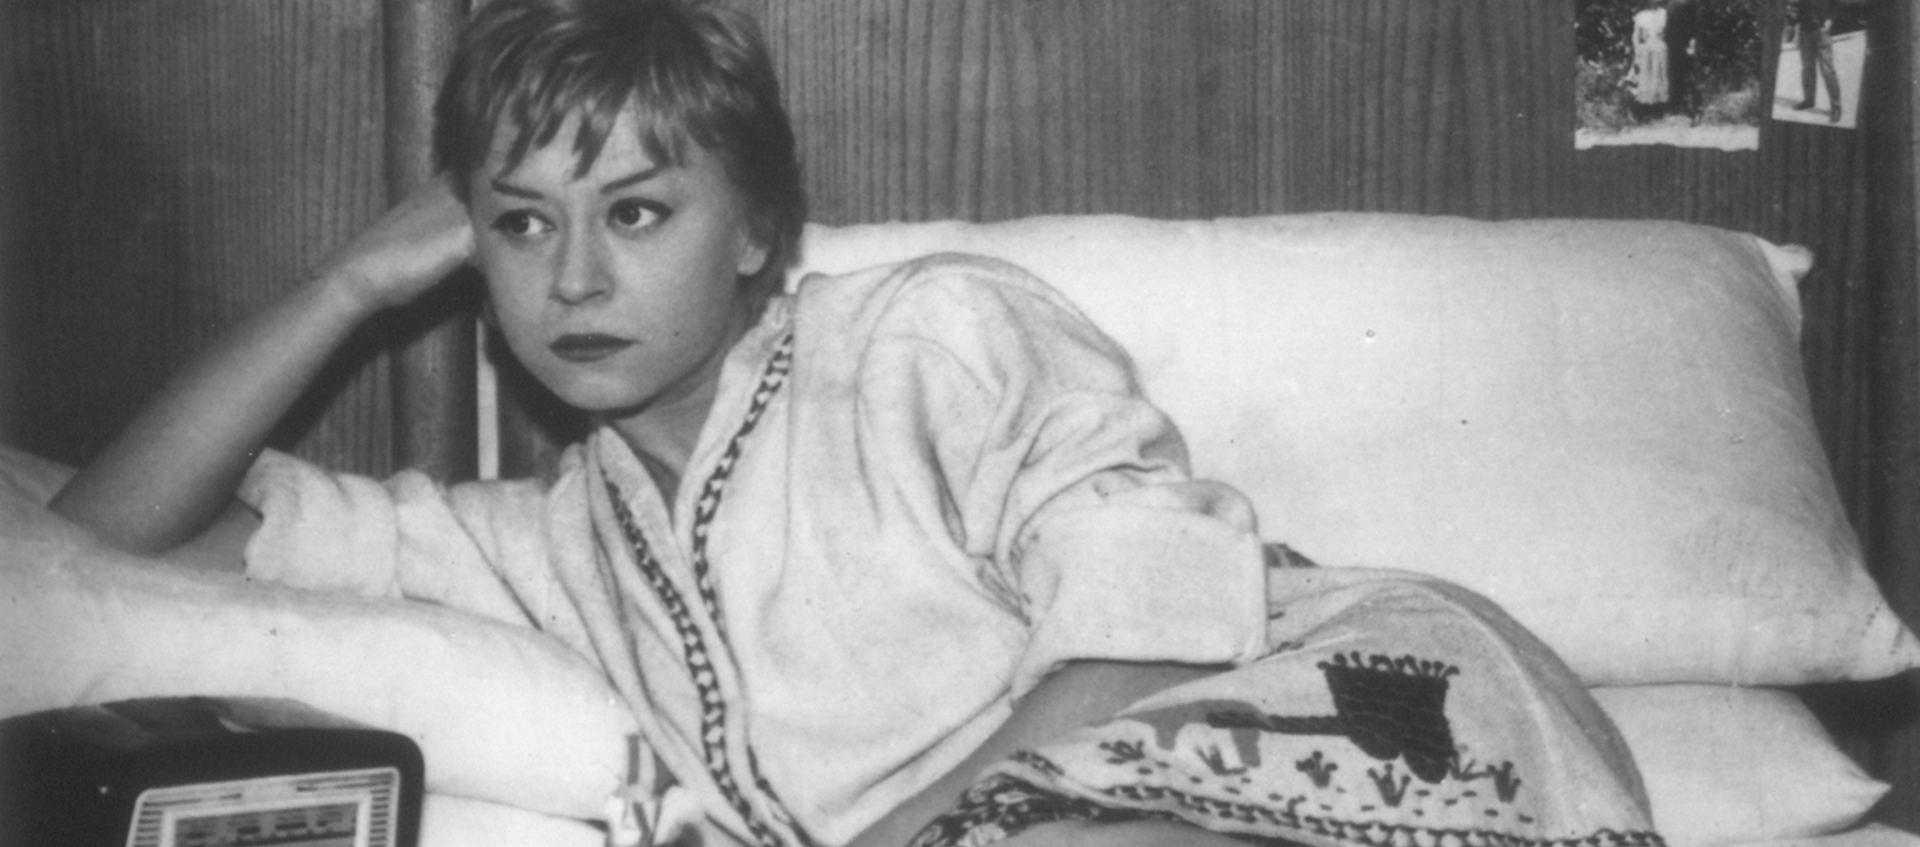 Black-and-white still of Cabiria (Giulietta Masina) lying on a bed with her head resting against her fist and her elbow on the pillow. There is a radio on the bed next to her and photographs on the headboard.